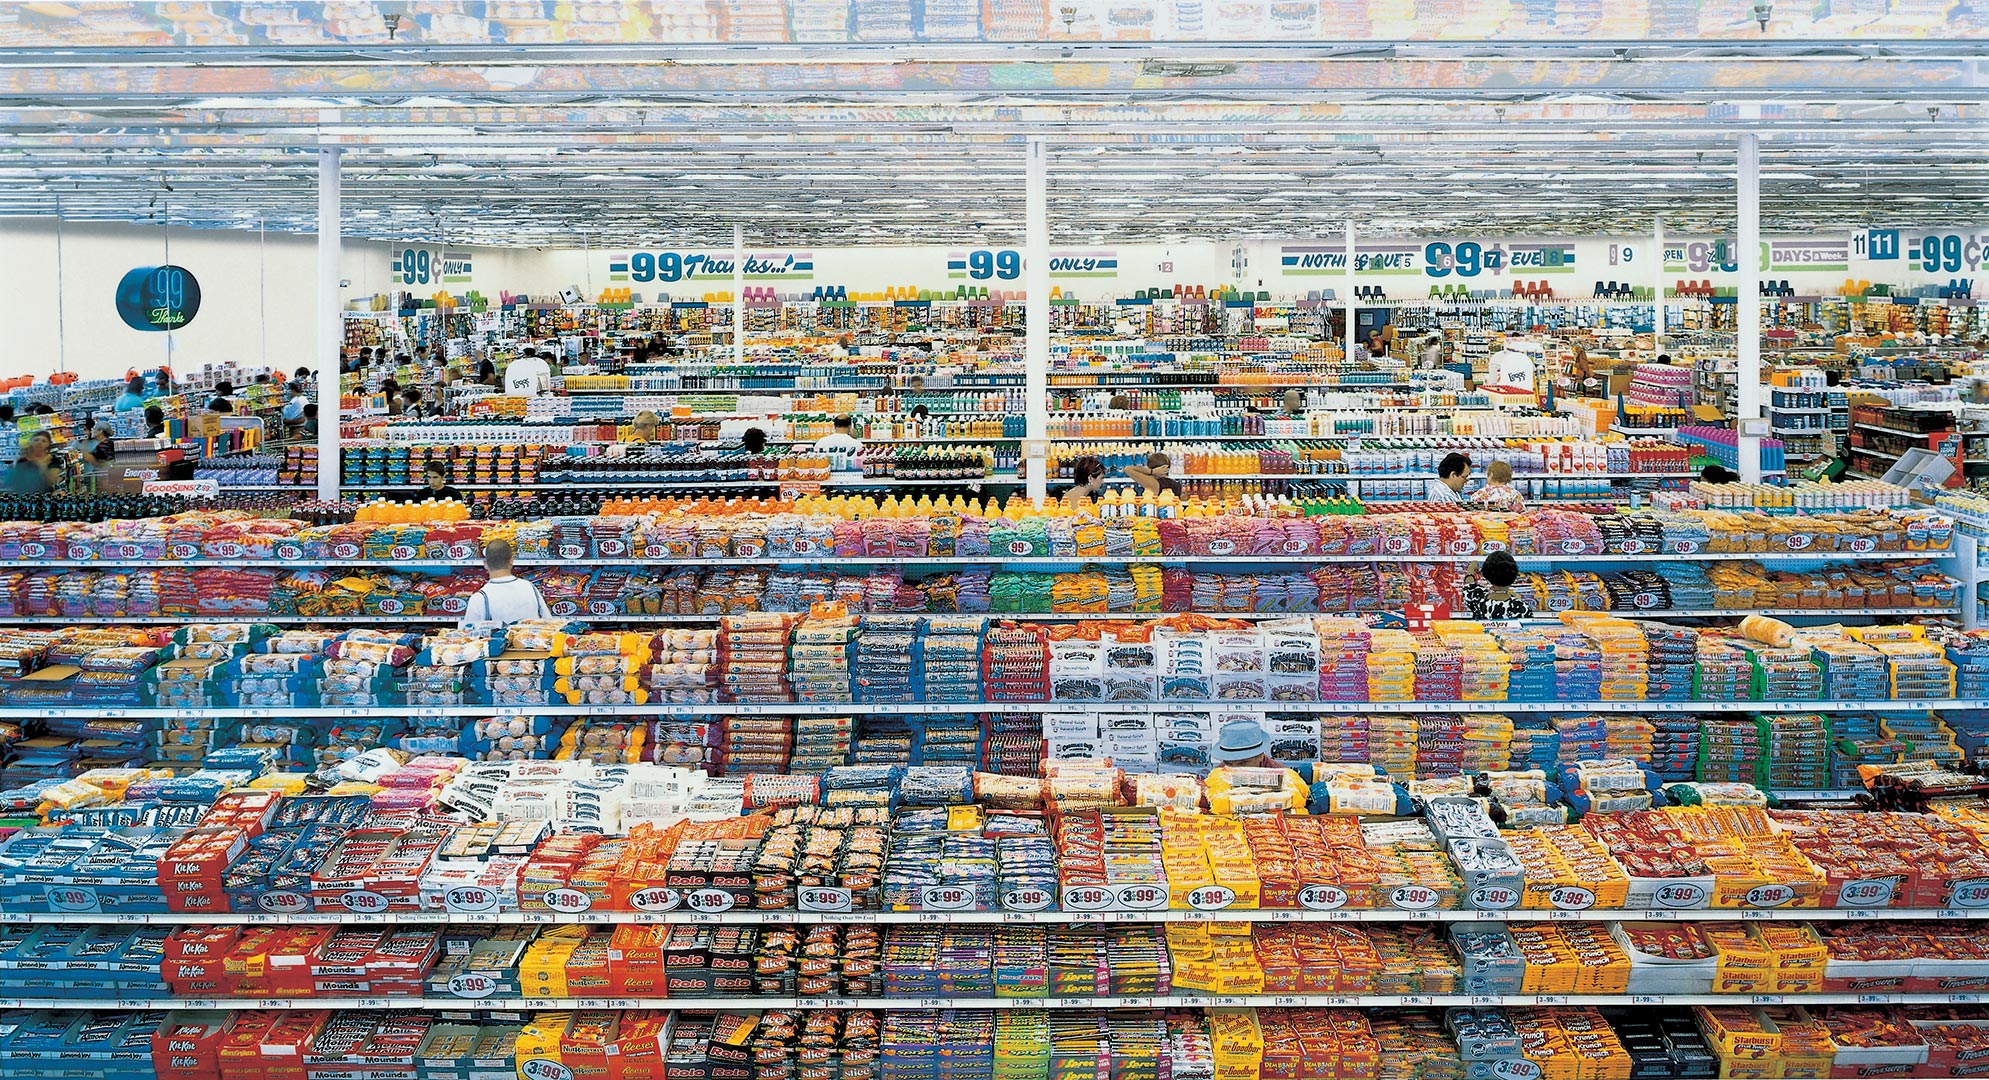 99 cent. andreas gursky  1999